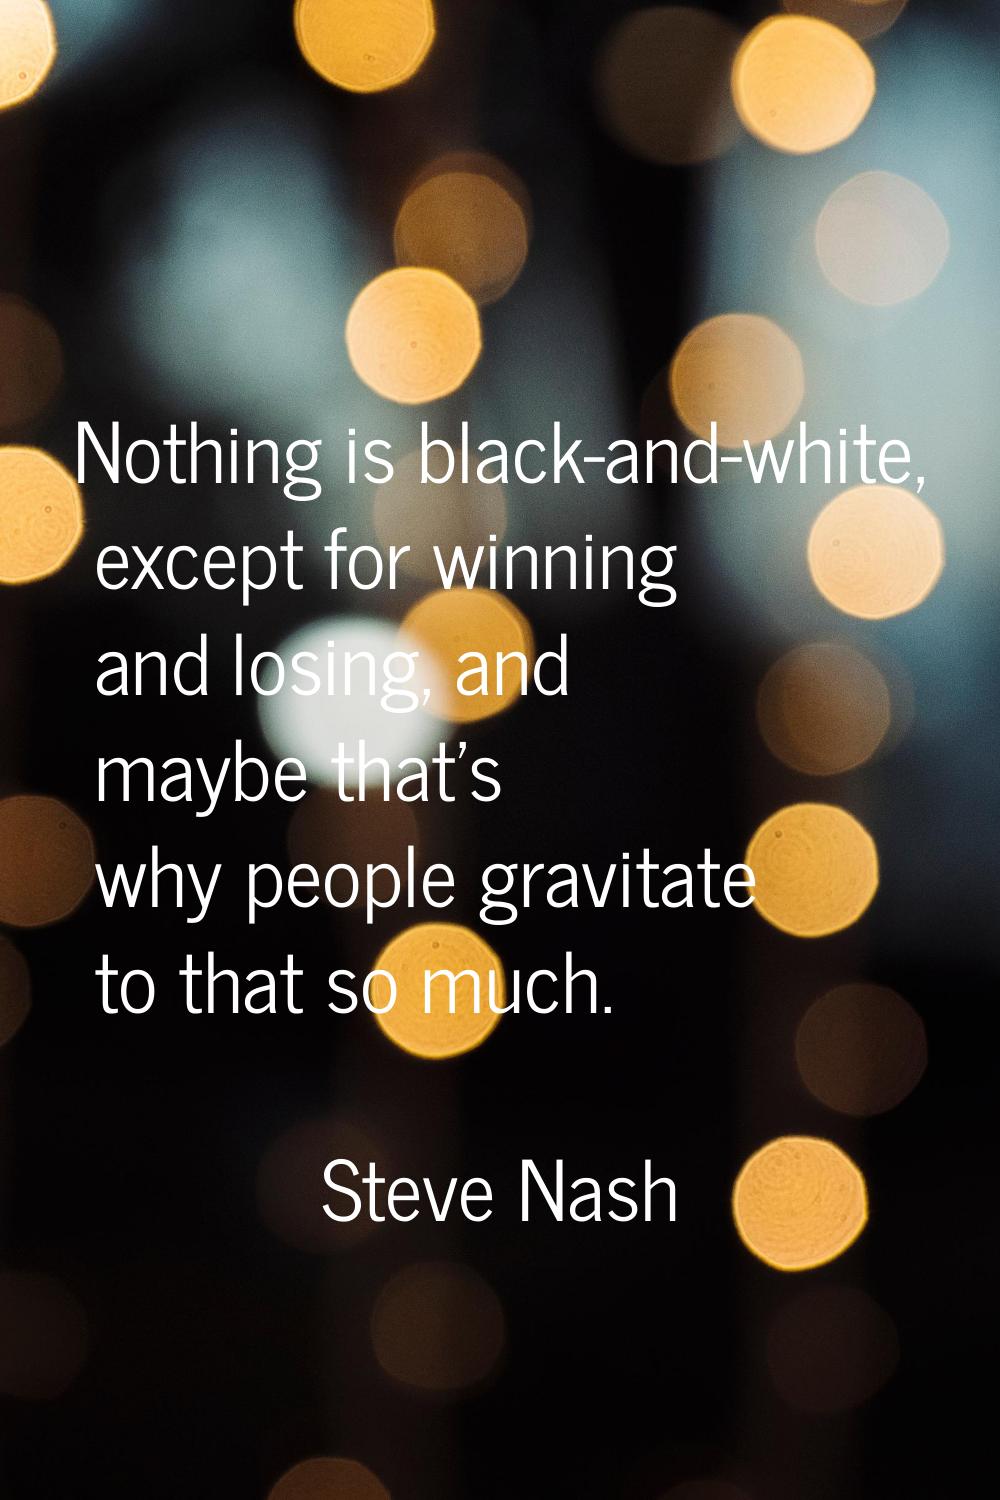 Nothing is black-and-white, except for winning and losing, and maybe that's why people gravitate to